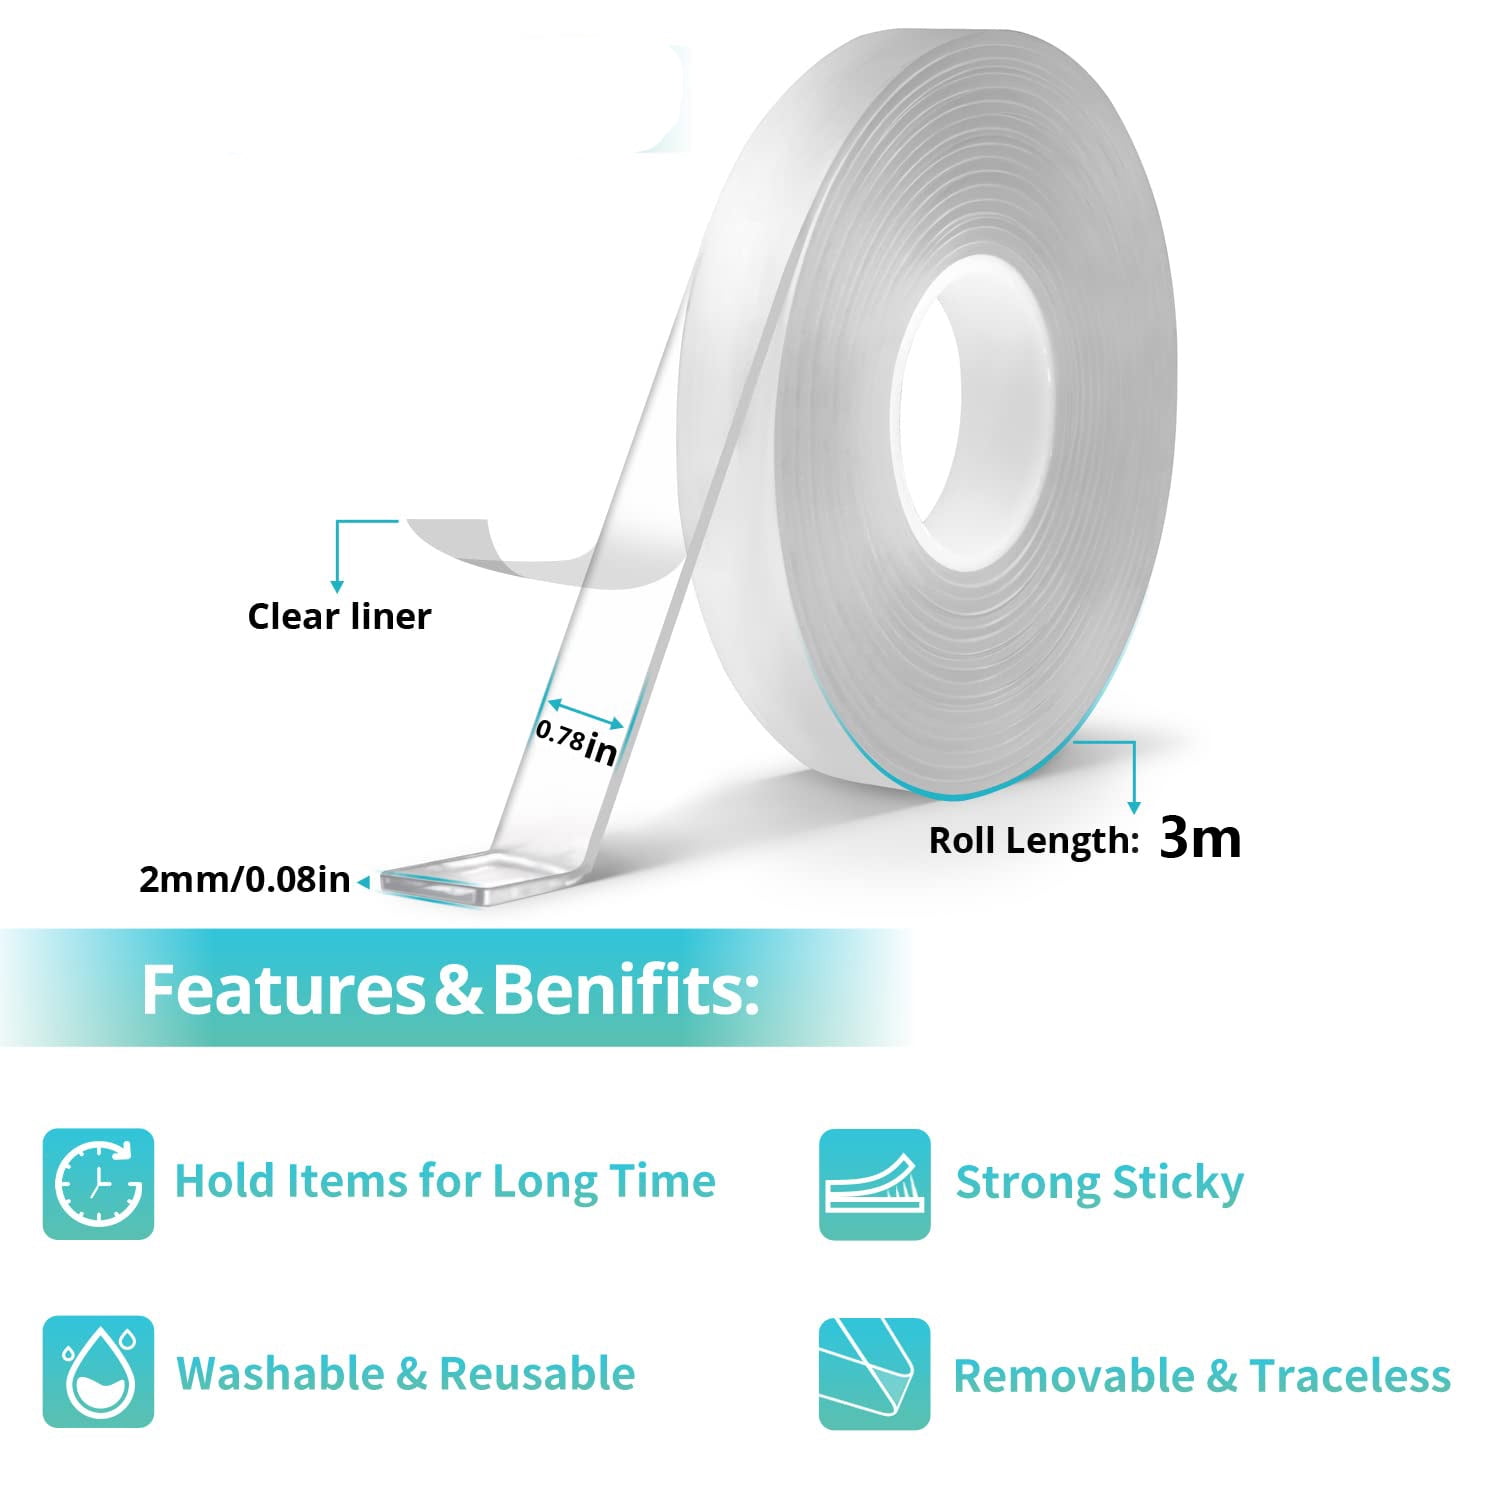 Double sided tape #Heavy duty #Multipurpose Removable #clear & tough m